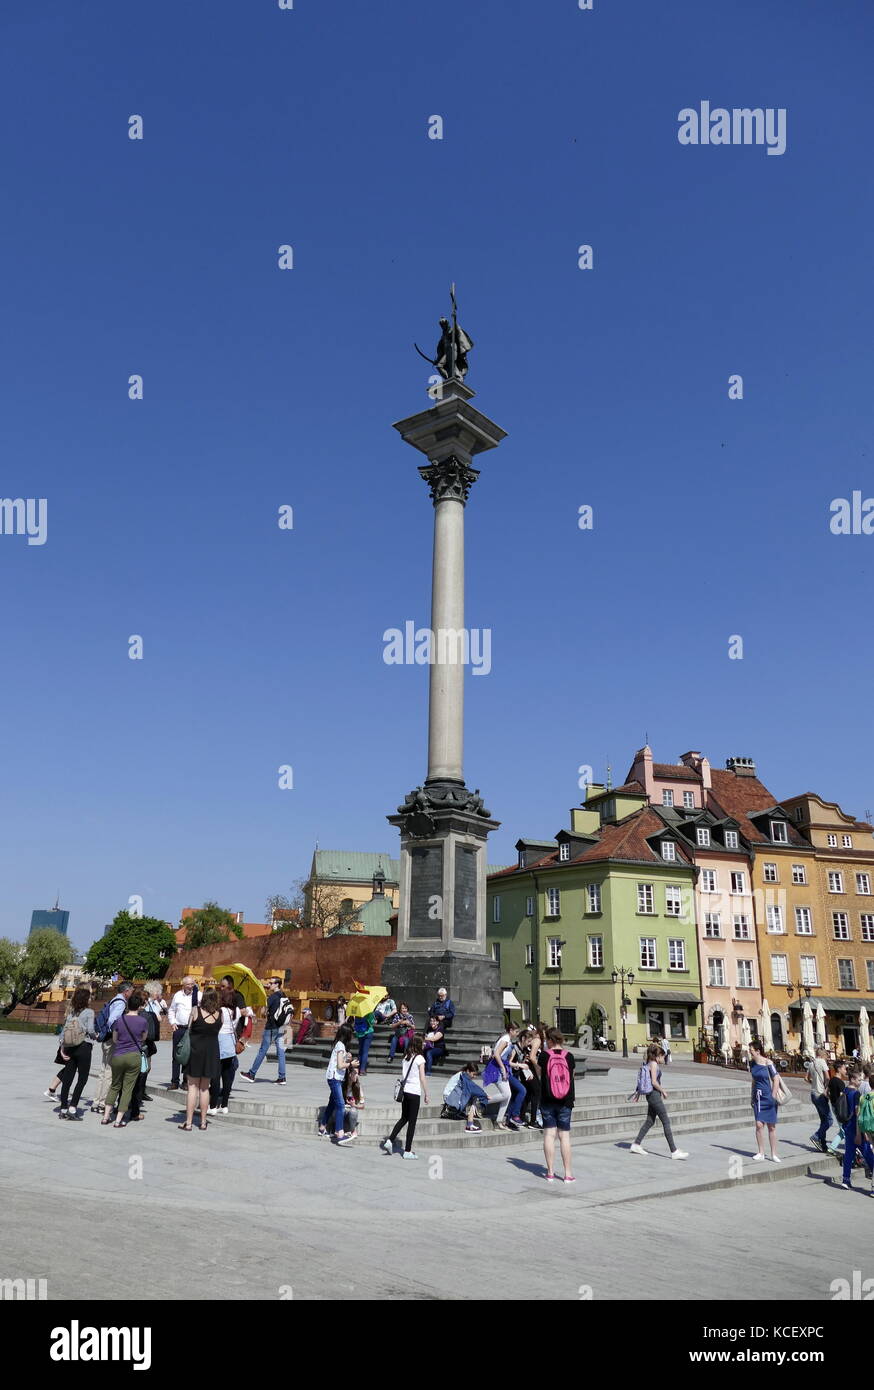 Photograph of Sigismund's Column (Kolumna Zygmunta), originally erected in 1644, is located in Castle Square, Warsaw, Poland and is one of Warsaw's most famous landmarks. The column and statue commemorate King Sigismund III Vasa, who in 1596 had moved Poland's capital from Kraków to Warsaw. Dated 21st Century Stock Photo